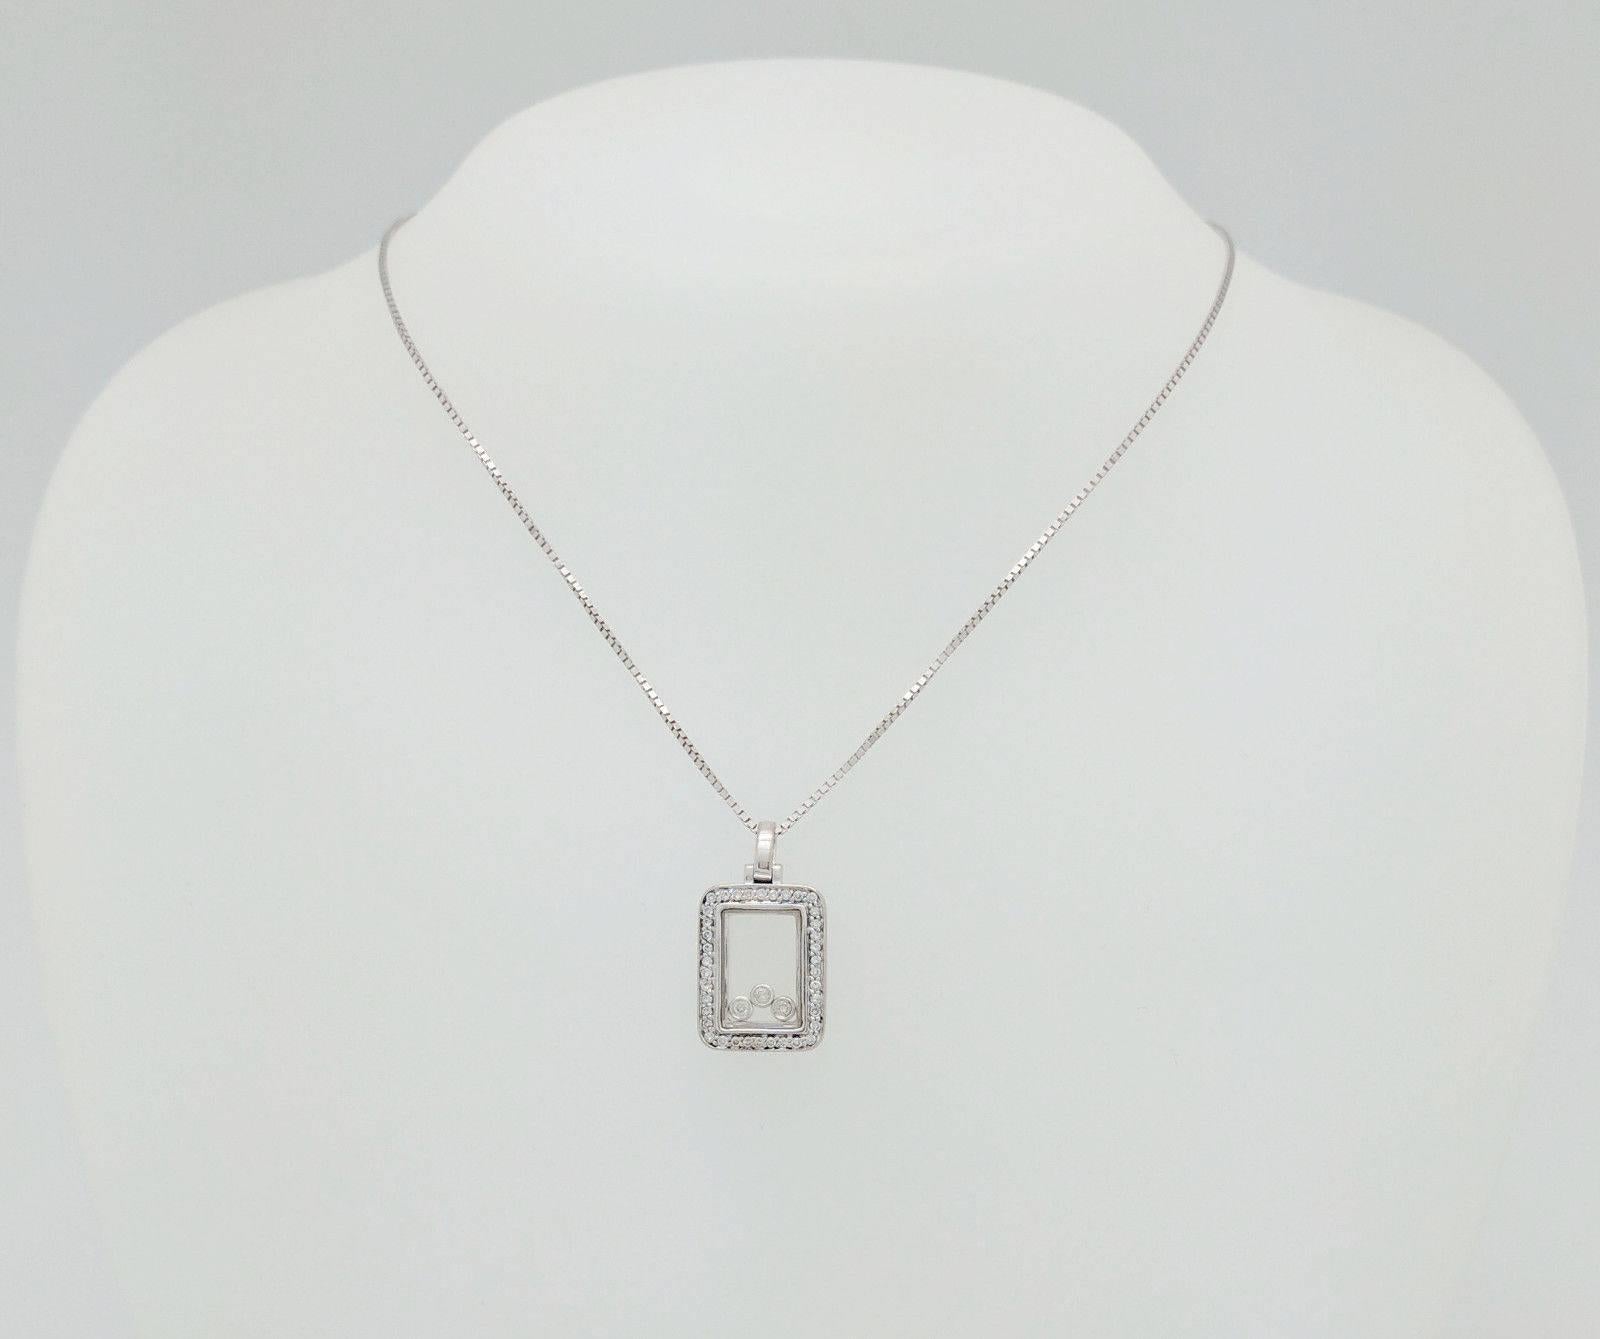 14K White Gold Floating Diamond Rectangle Pendant Necklace

You are viewing a beautiful floating diamond rectangle pendant necklace. This piece is crafted from 14k white gold and weighs 8.7 grams. The pendant features (40) round natural diamonds for